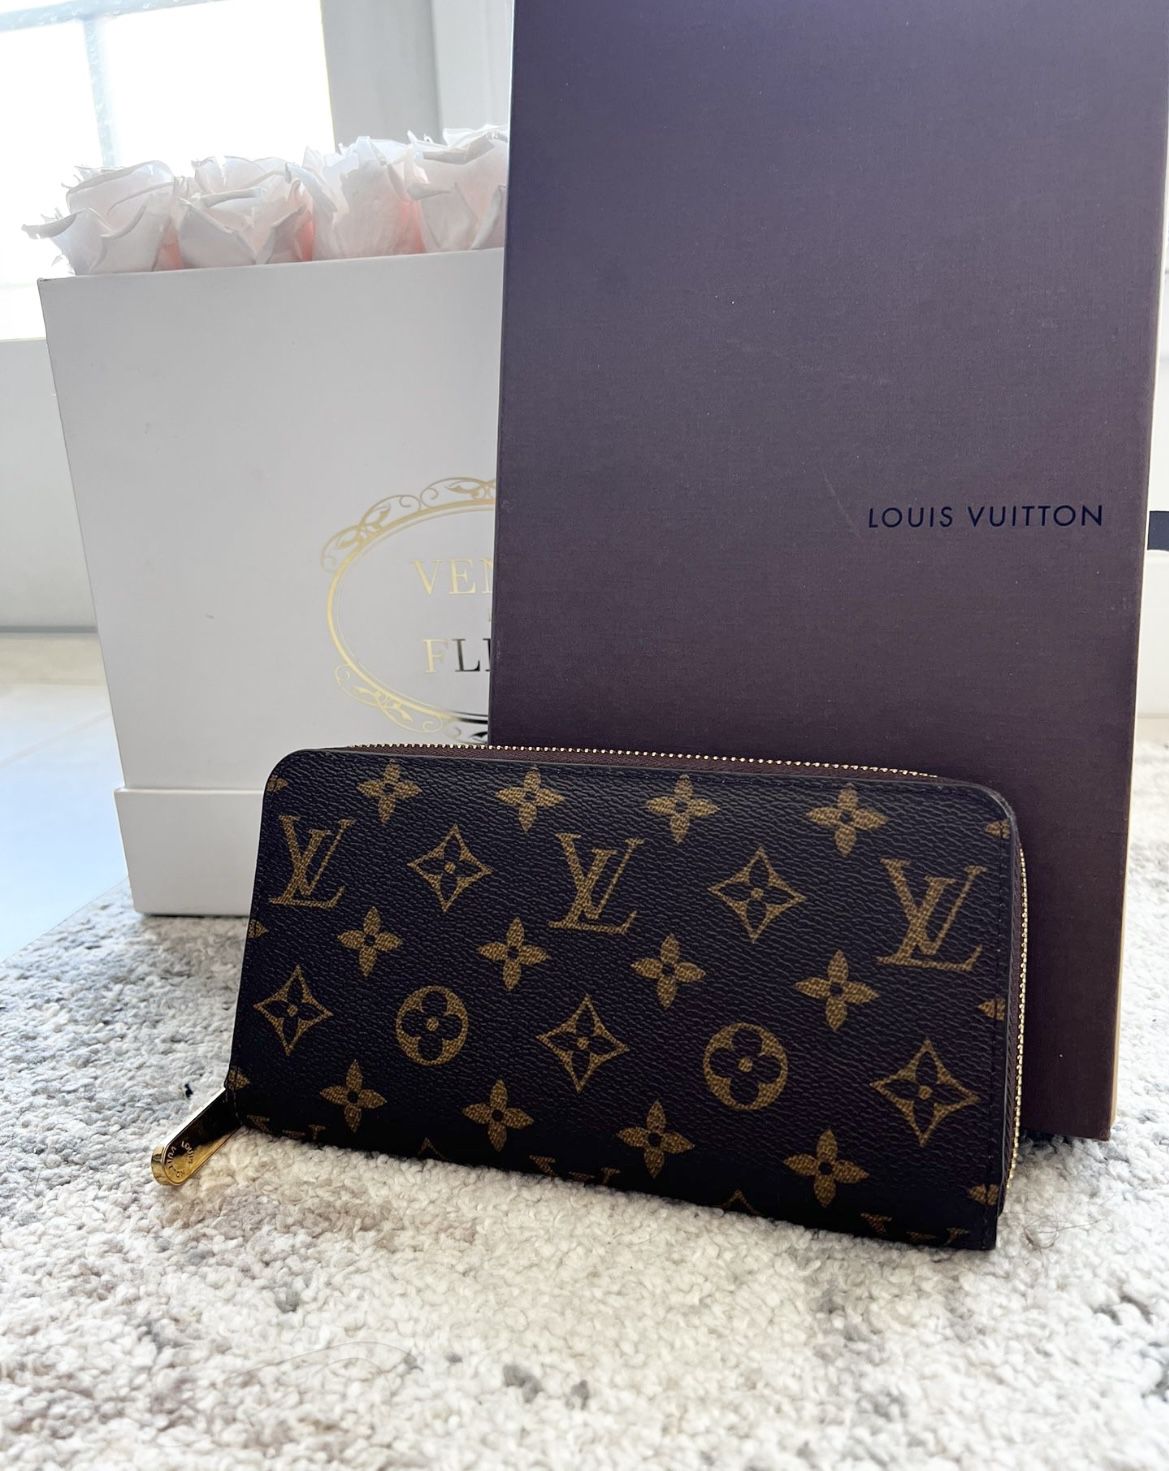 Louis Vuitton Zippy Wallet for Sale in Rancho Cucamonga, CA - OfferUp